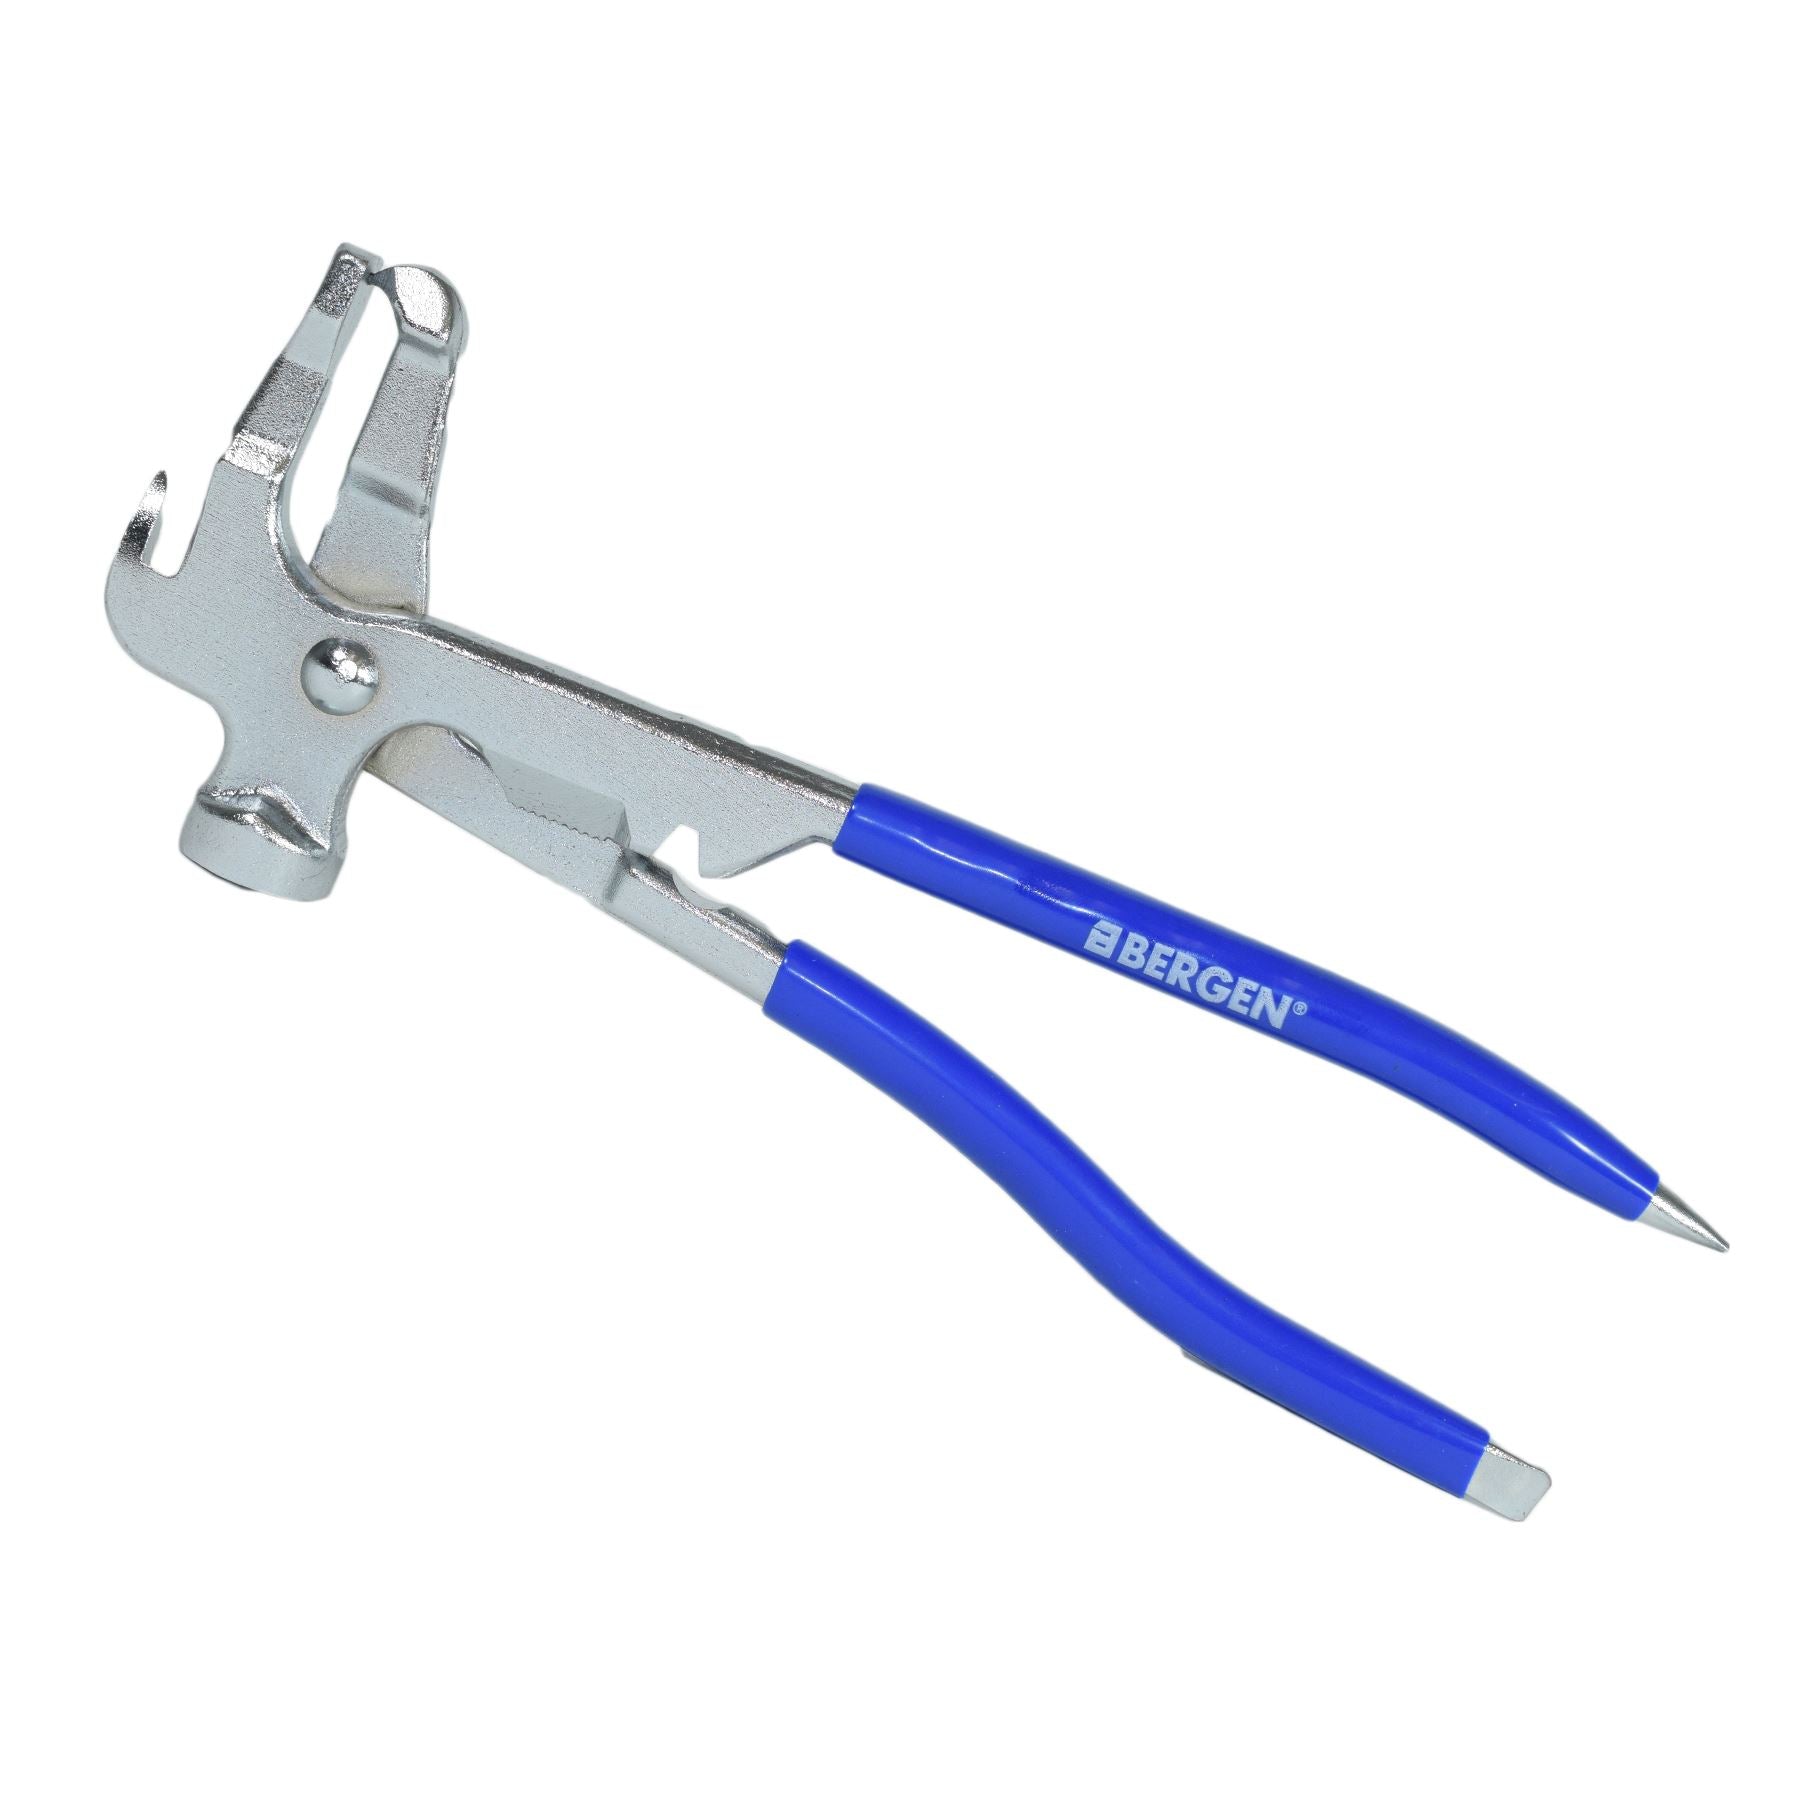 Wheel balance Weight Pliers Remover Removal Insert Lead Weights By Bergen